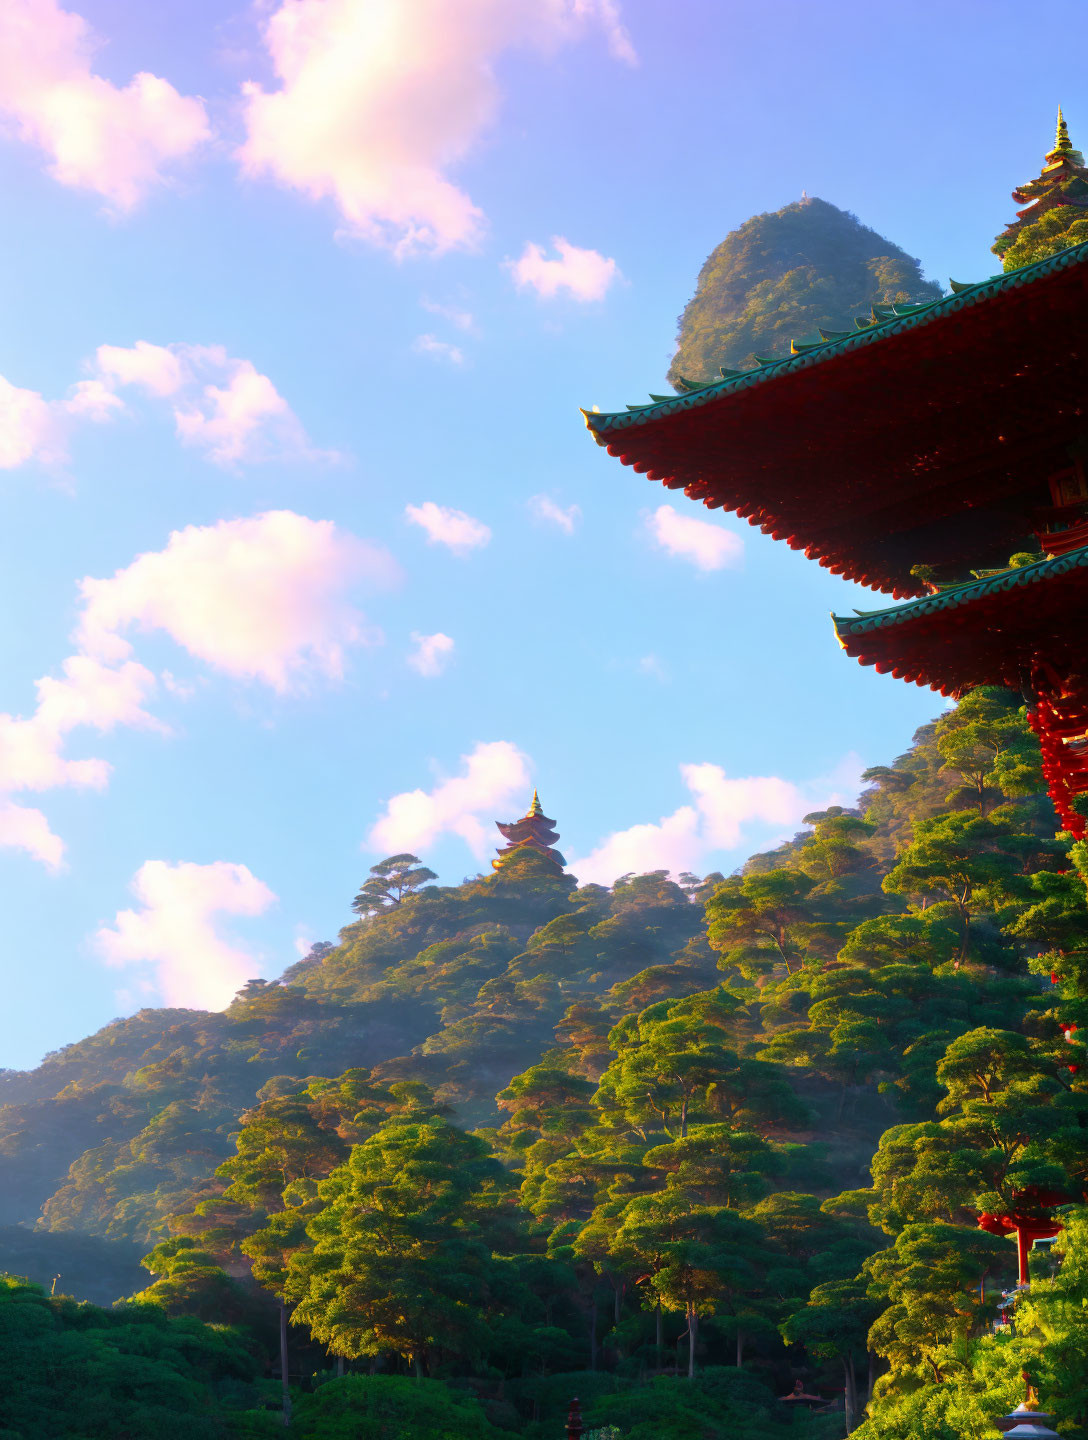 Traditional Pagoda Surrounded by Green Hills and Blue Sky